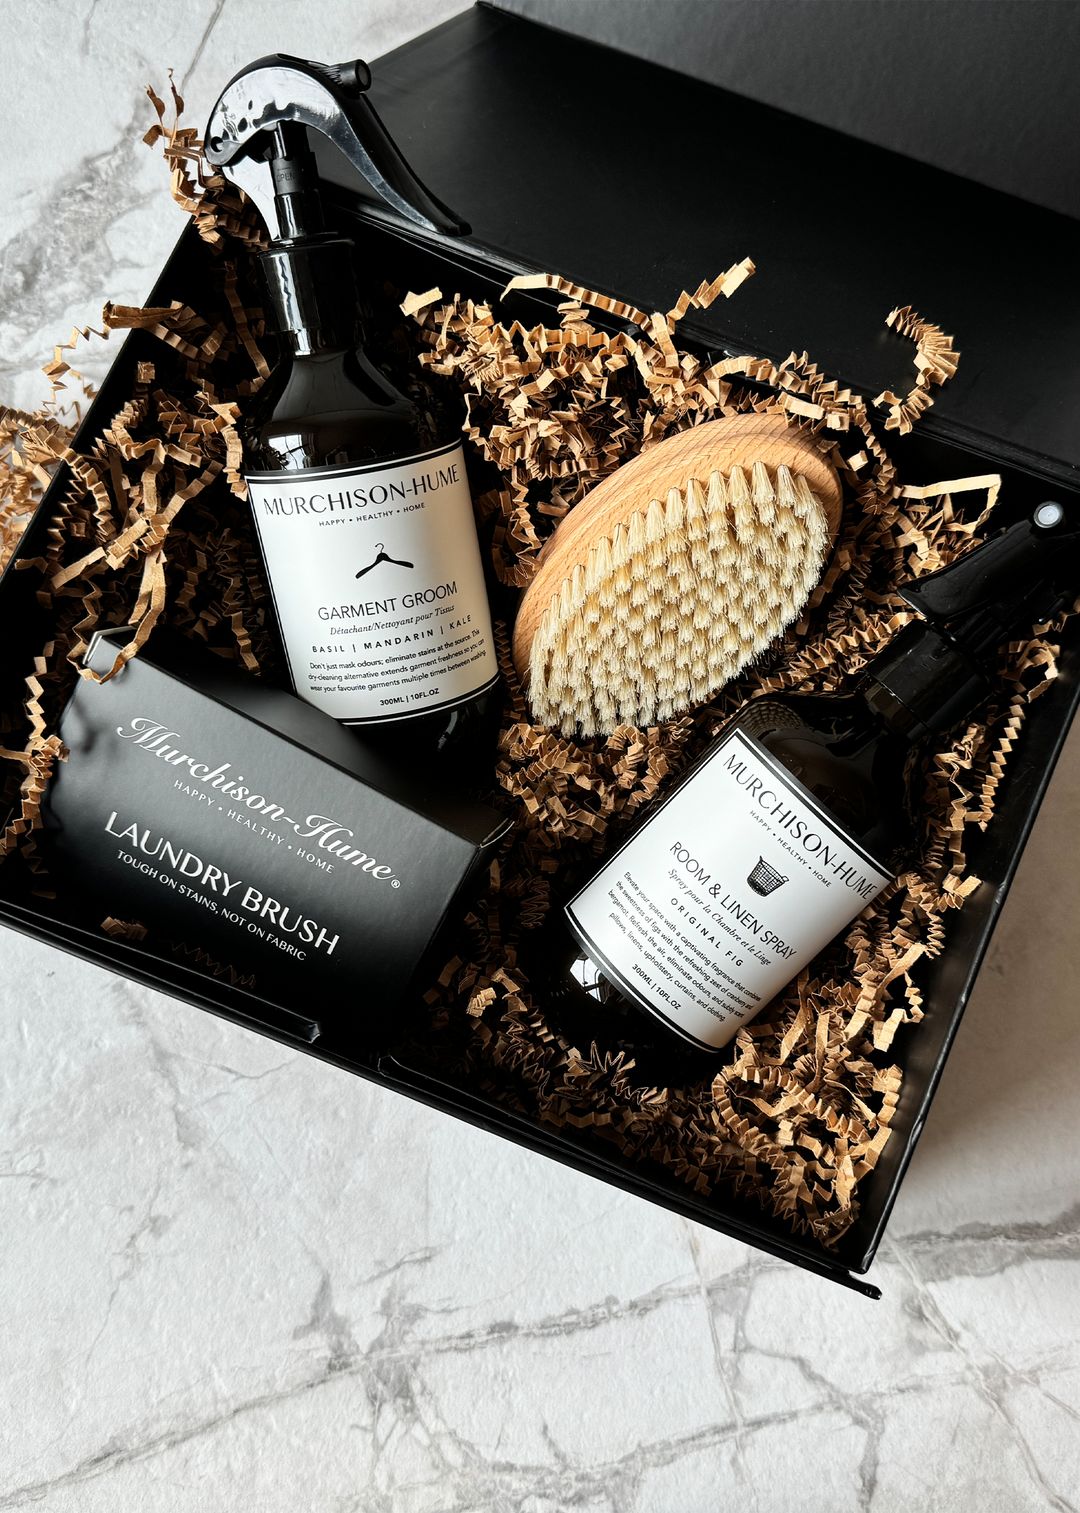 GET THE PERFECT GIFT: The Garment Care Gift Box